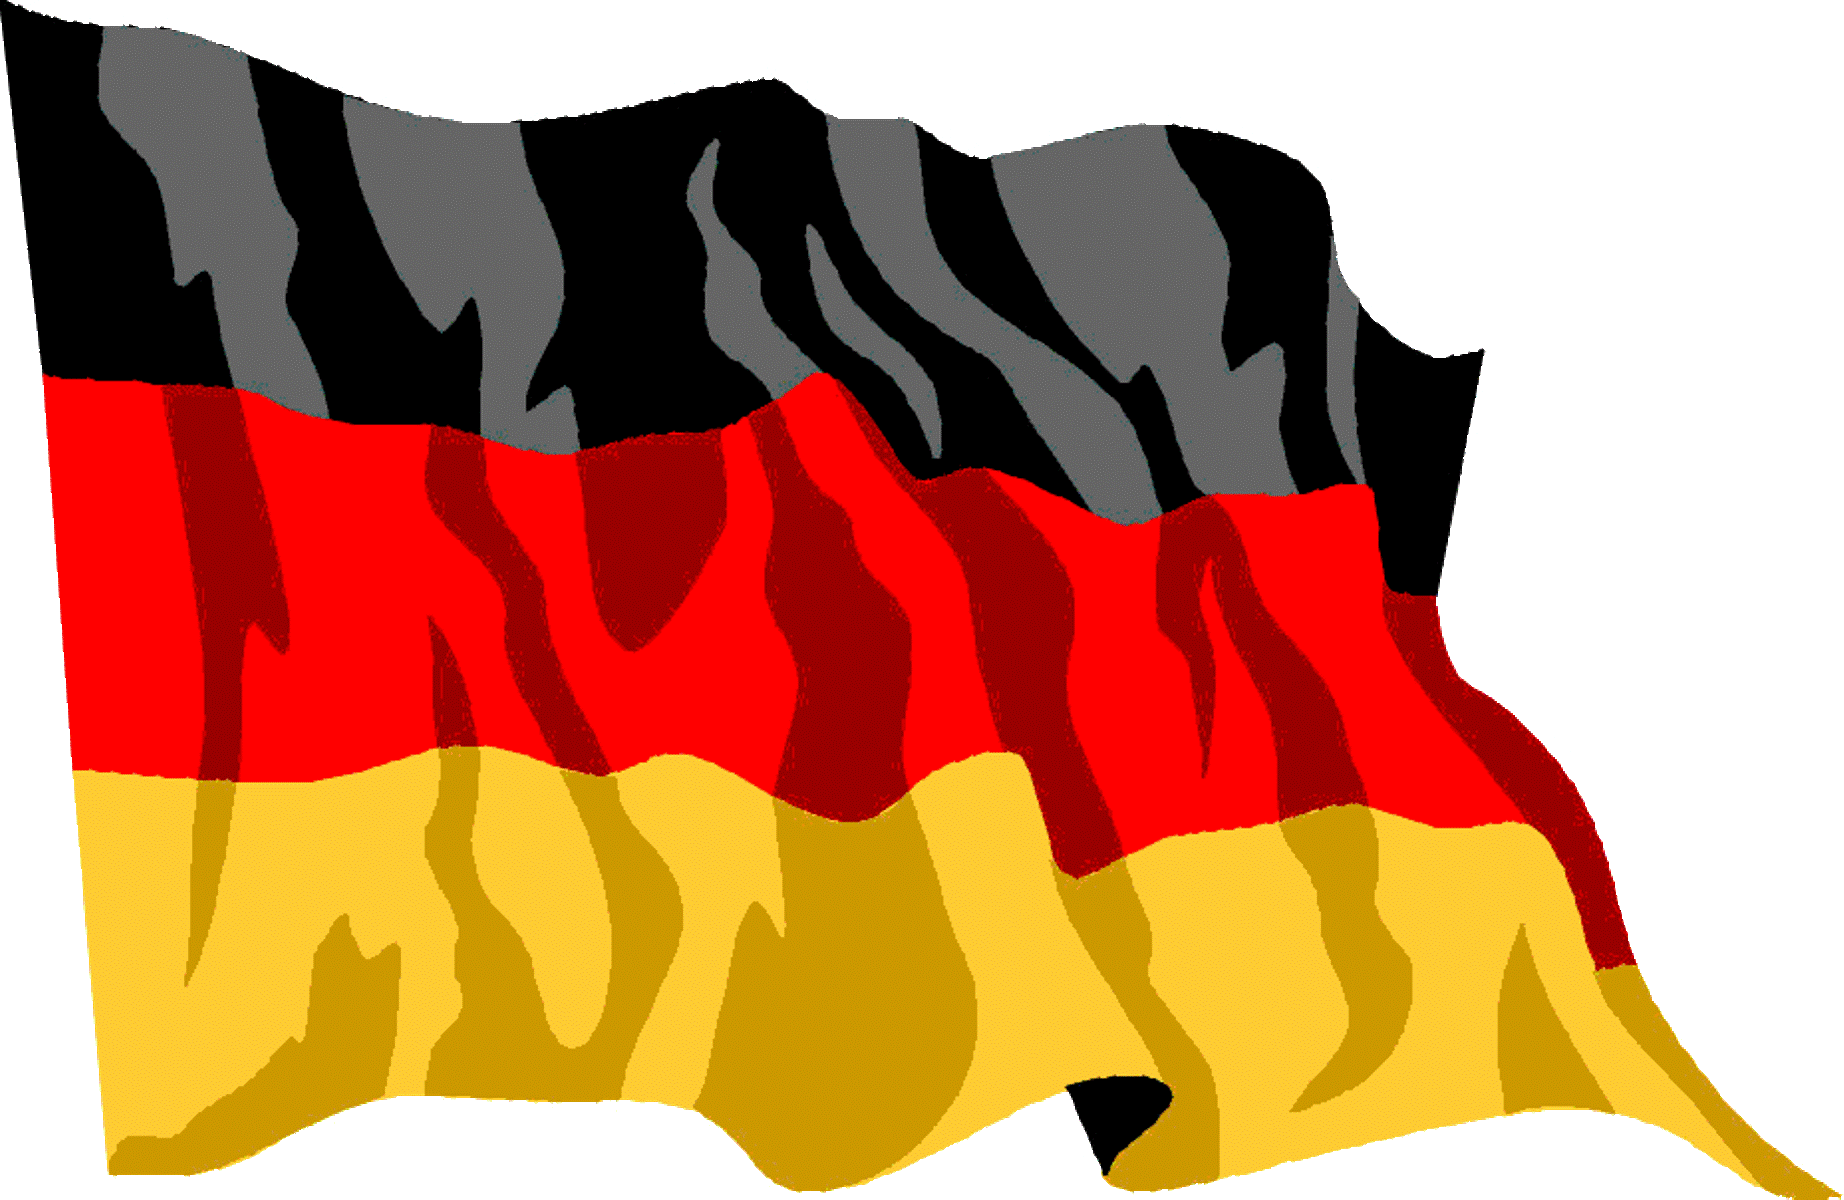 german clipart flag germany